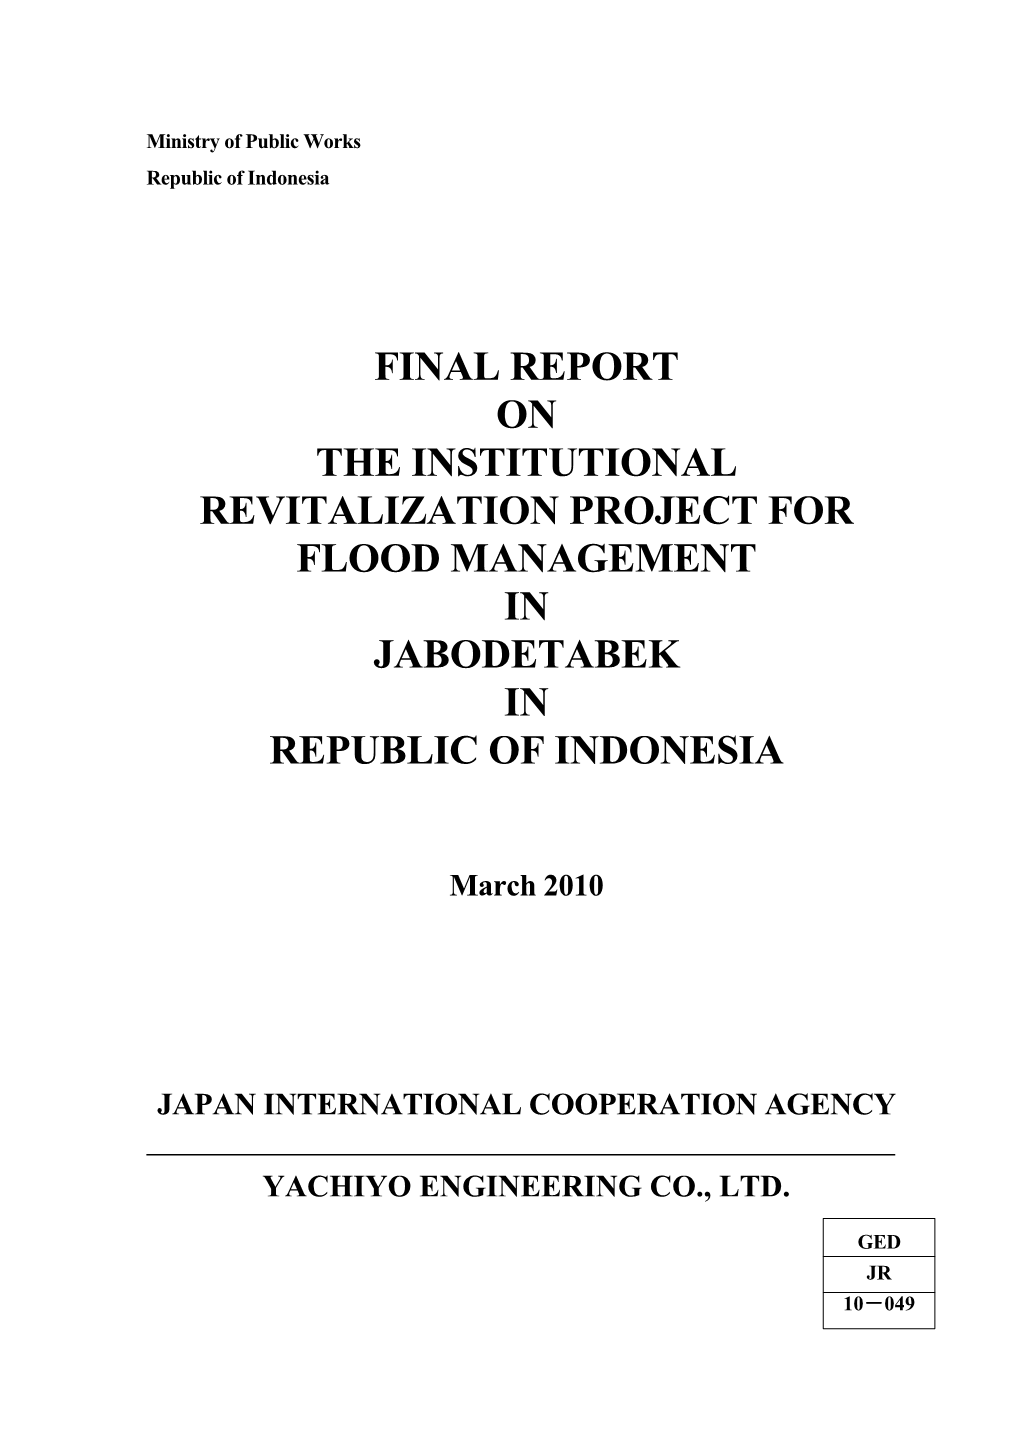 Final Report on the Institutional Revitalization Project for Flood Management in Jabodetabek in Republic of Indonesia